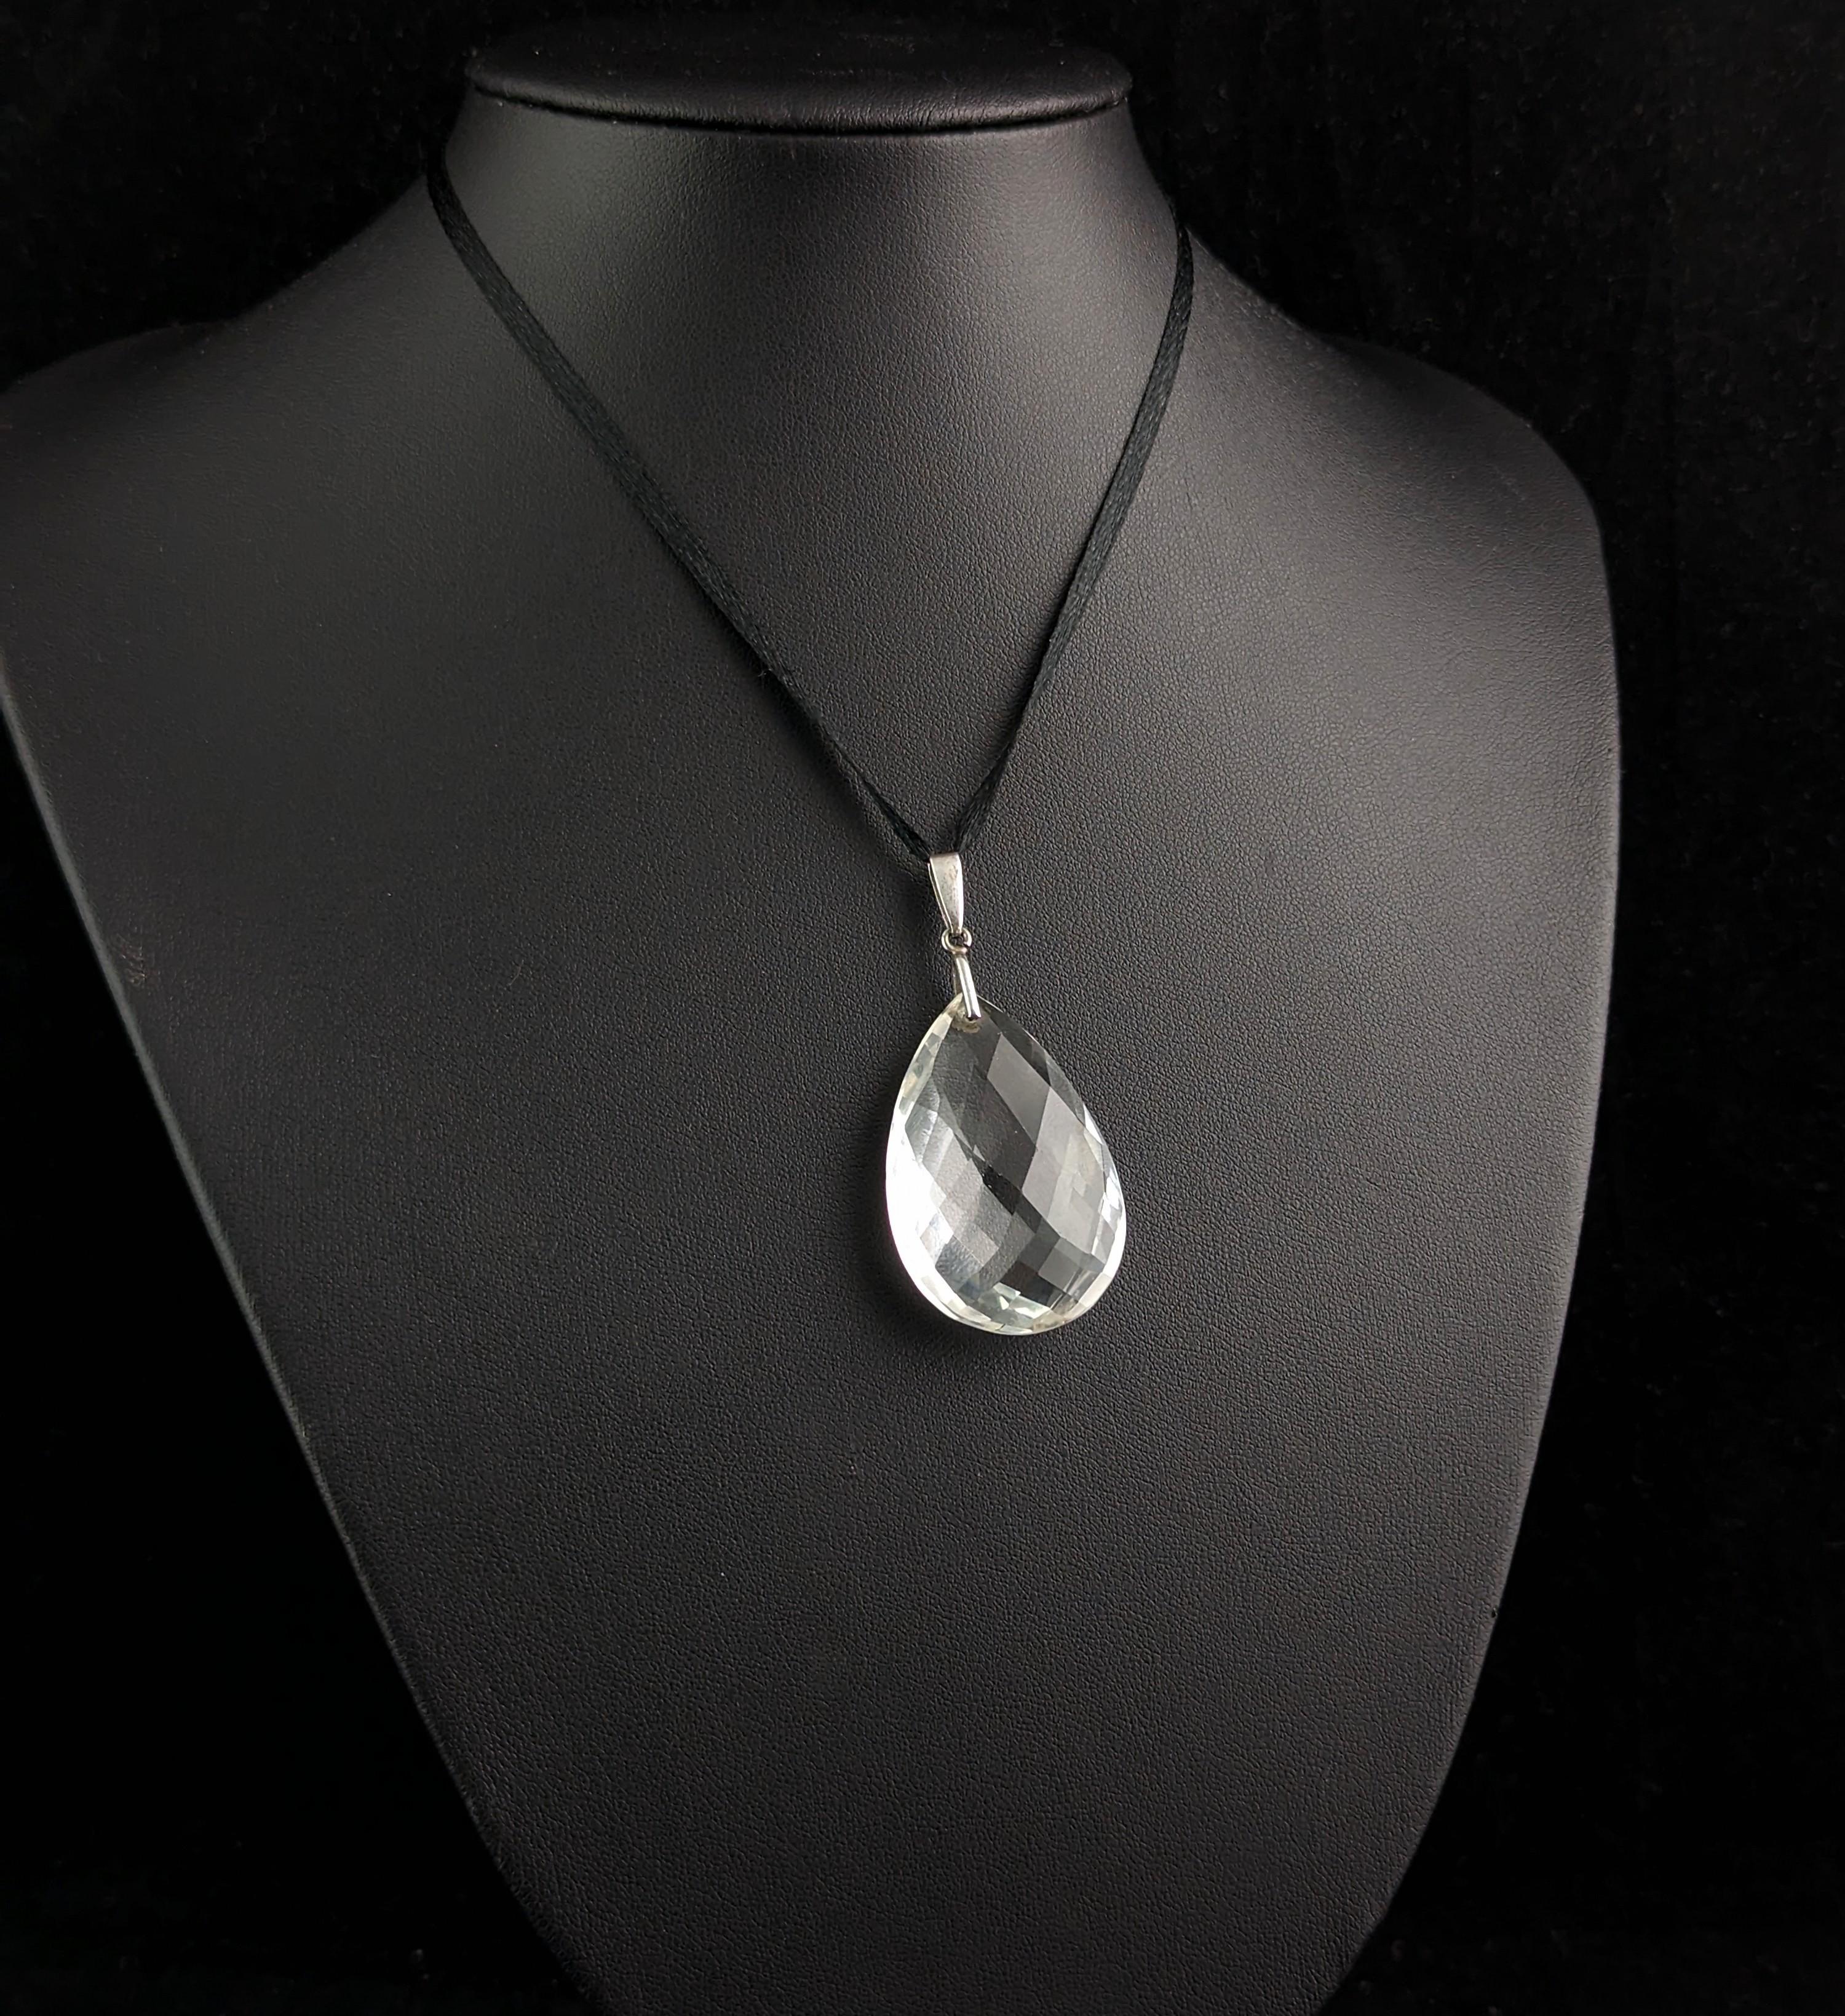 A beautiful antique, early Art Deco teardrop shaped Rock Crystal briolette pendant.

A beautifully faceted teardrop shape Rock Crystal suspended from a sterling silver bale.

The briolette cut is a most beautiful cut for gemstones, a hard cut to